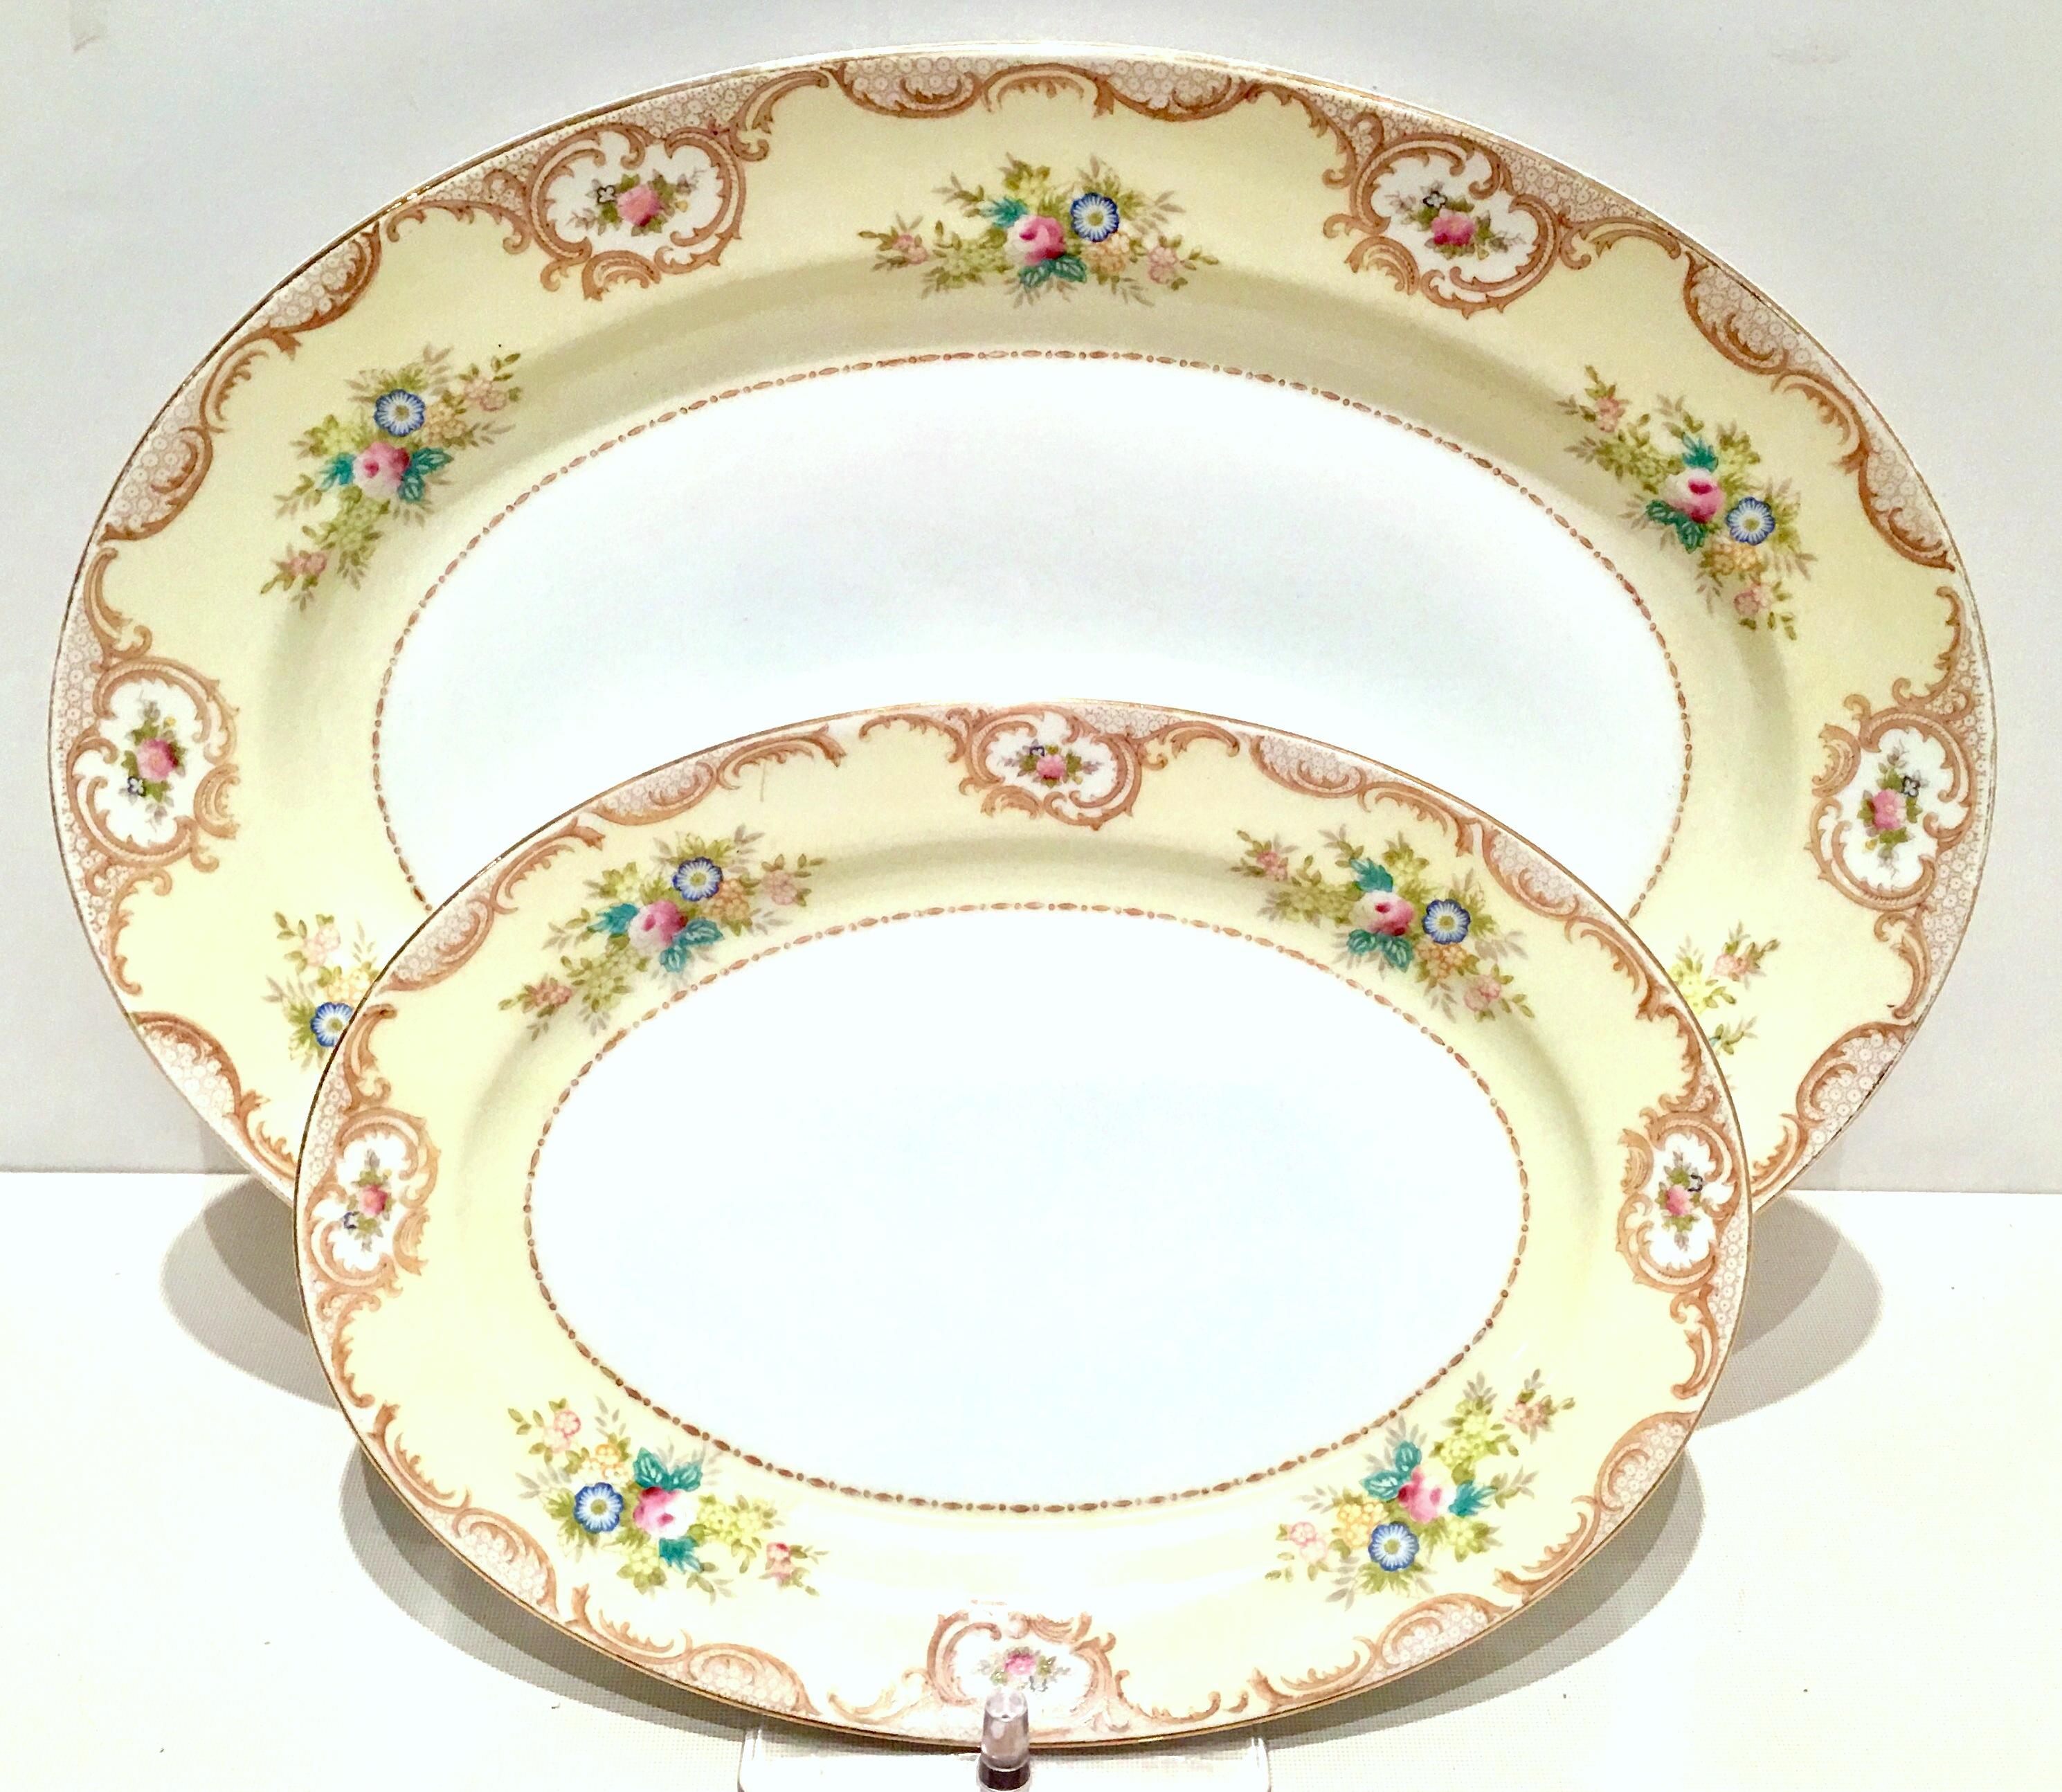 20th Century Pair Of Japanese porcelain hand-painted oval serving platters. Each piece features a white ground with a butter yellow border and Art Nouveau style floral and 22K-gold scroll pattern. Each piece has a 22-karat gold rim detail. Each